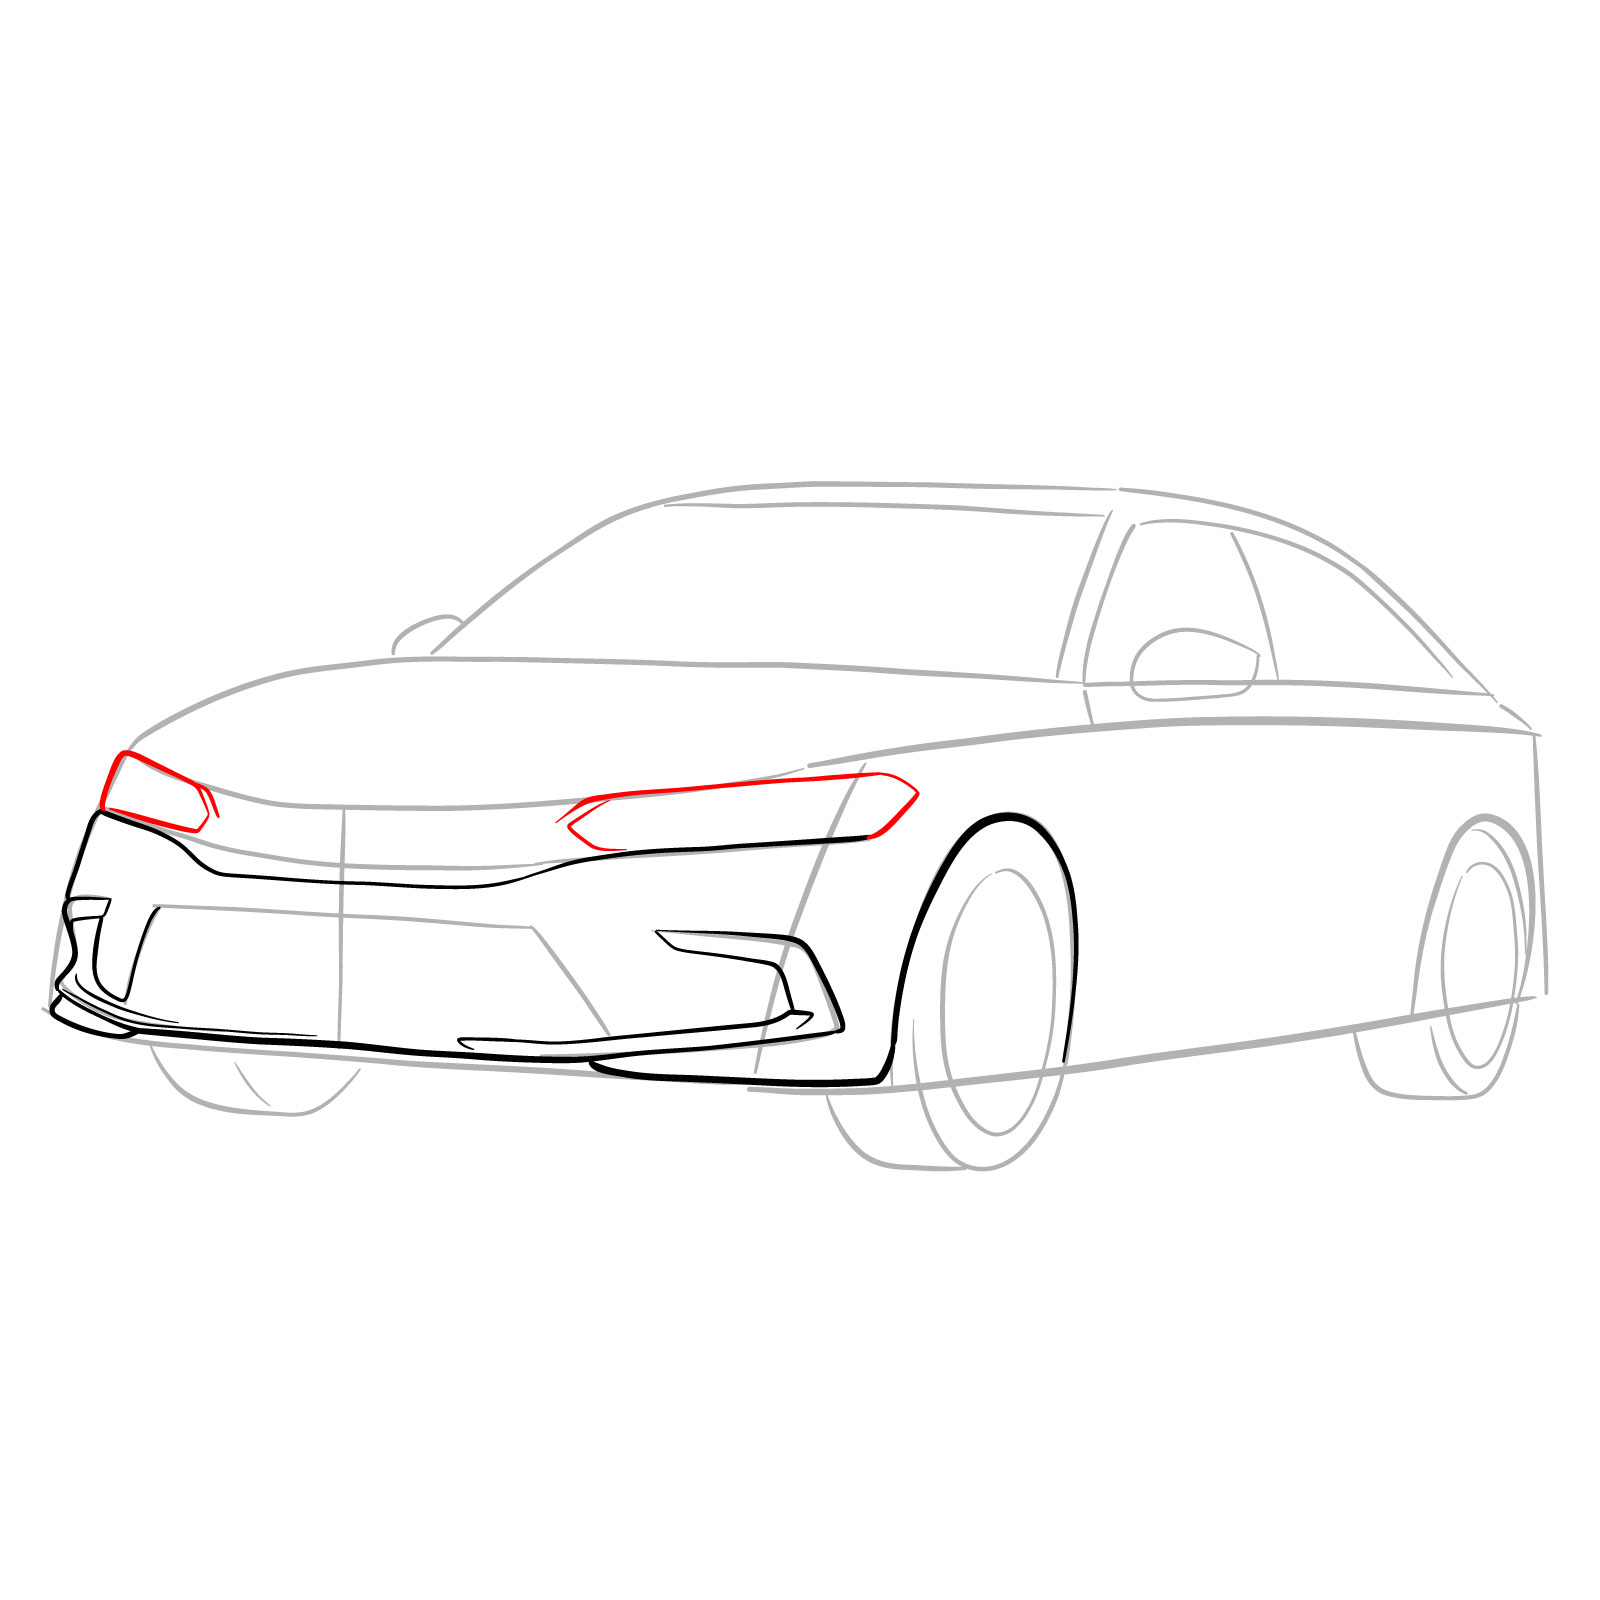 How to draw a 2022 Honda Civic - step 09